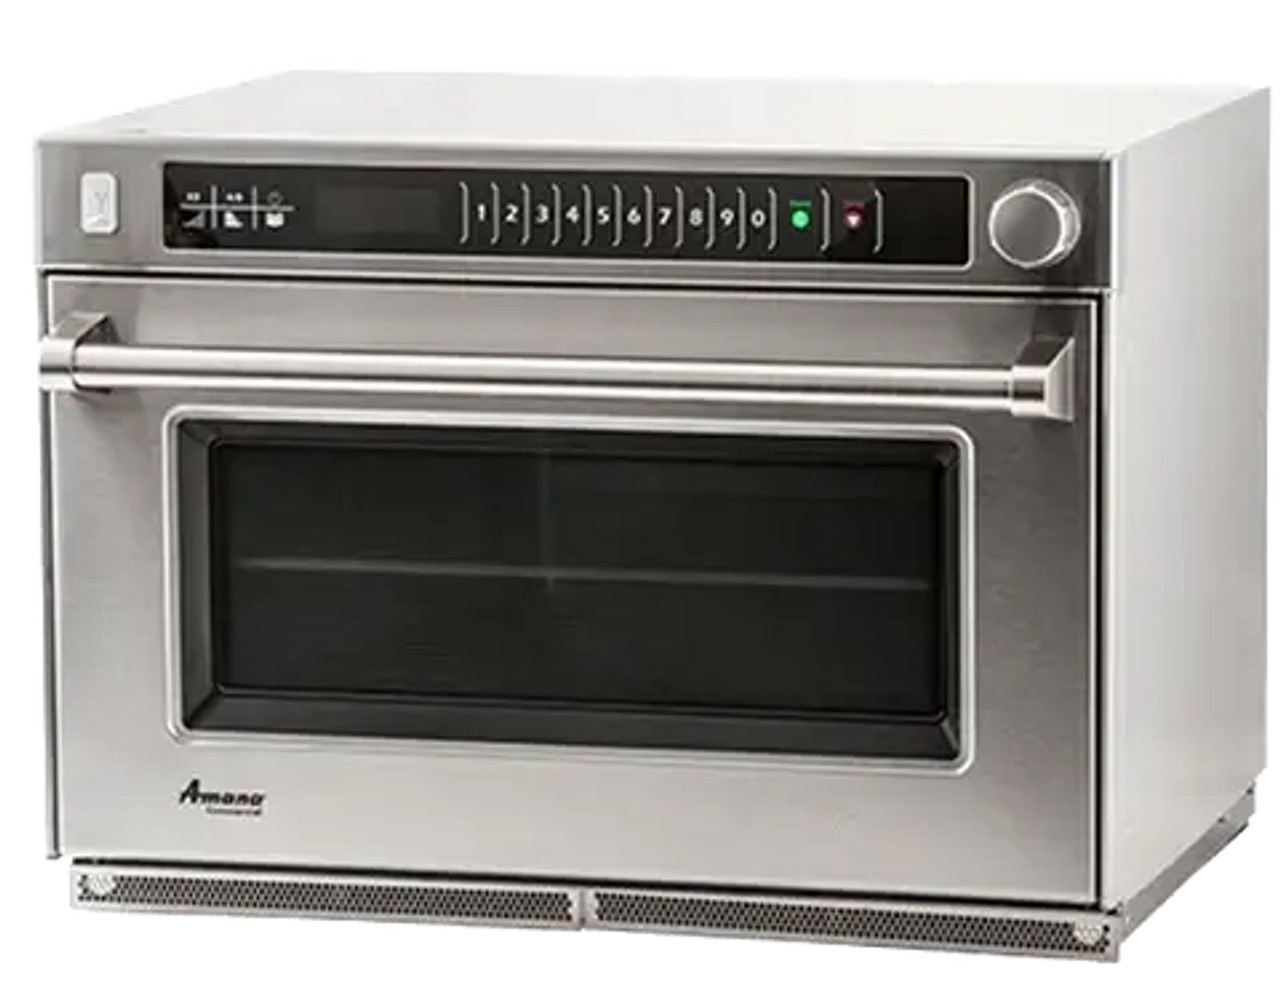 Amana Heavy Duty Commercial Steamer Microwave Oven - 208/240V, 2200W | Versatile Cooking Power and Steaming Performance